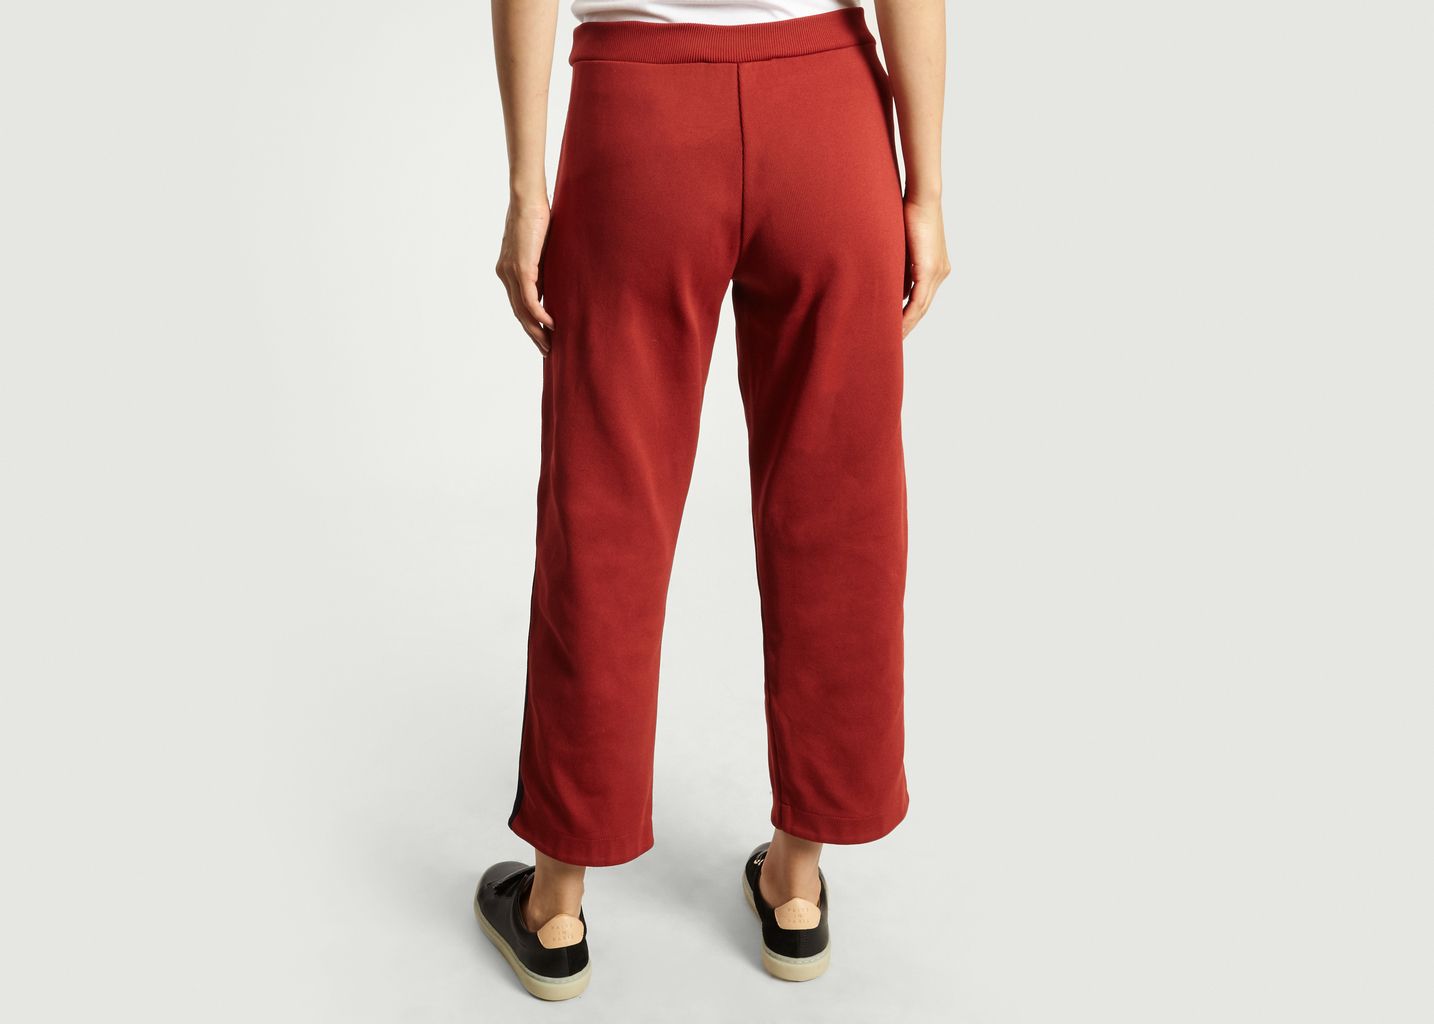 Kors Anderson Trousers - Roseanna